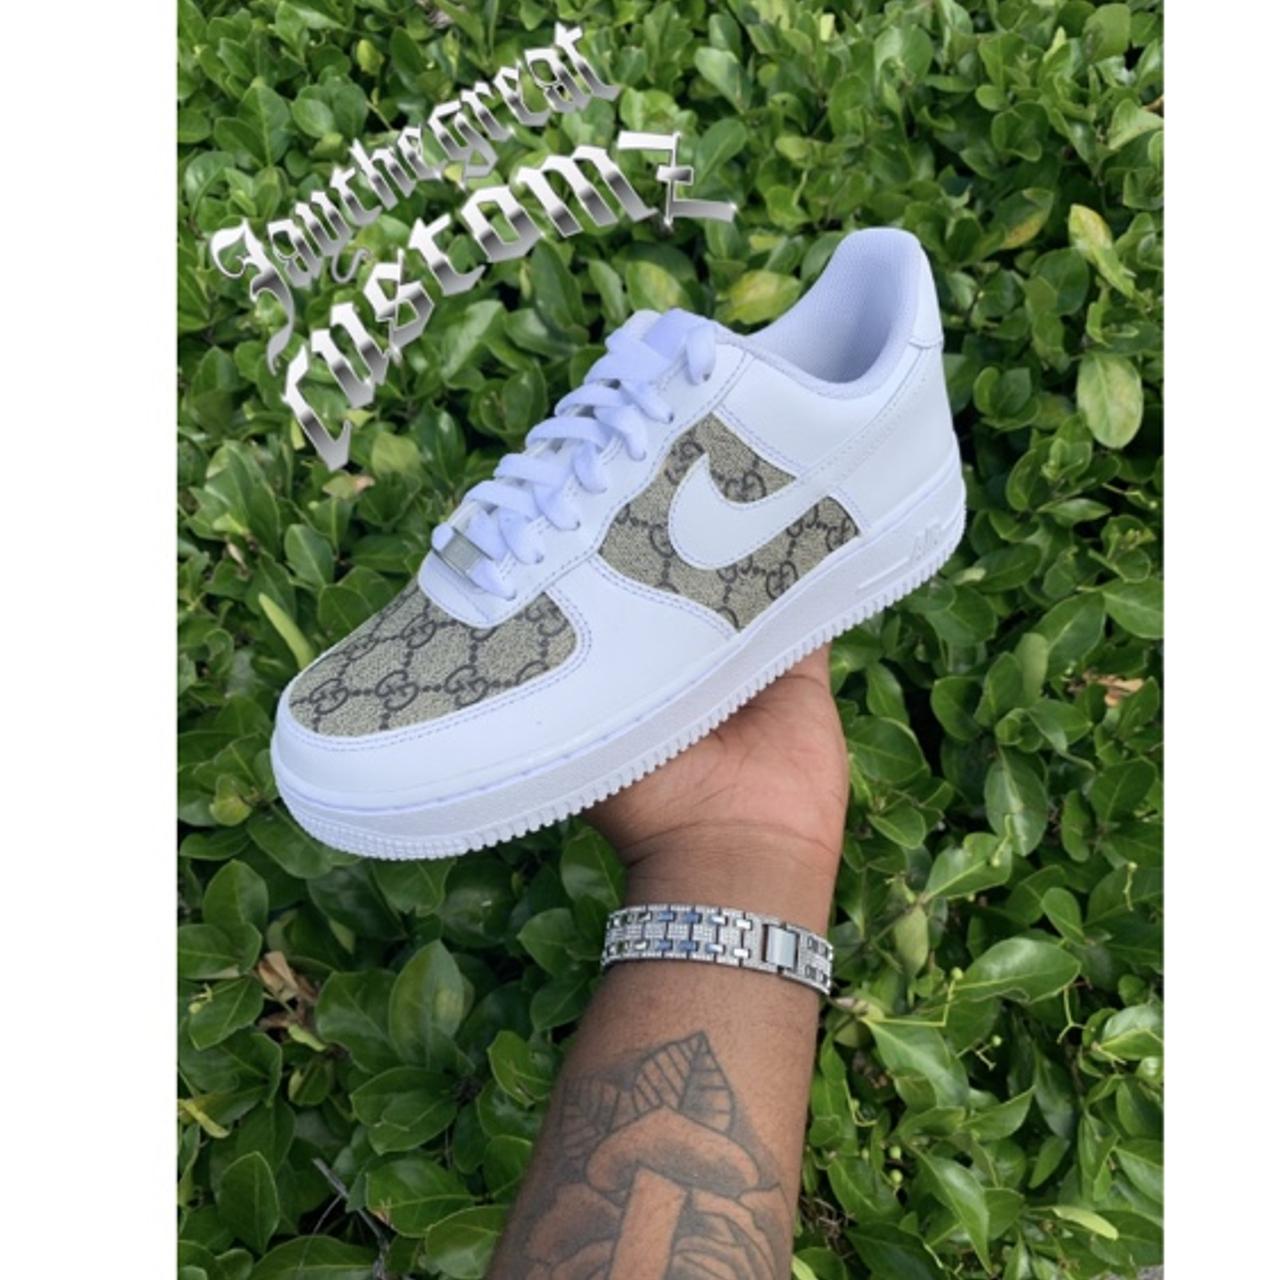 Gucci Custom Af1 Check out my Instagram 🛑If the - Depop